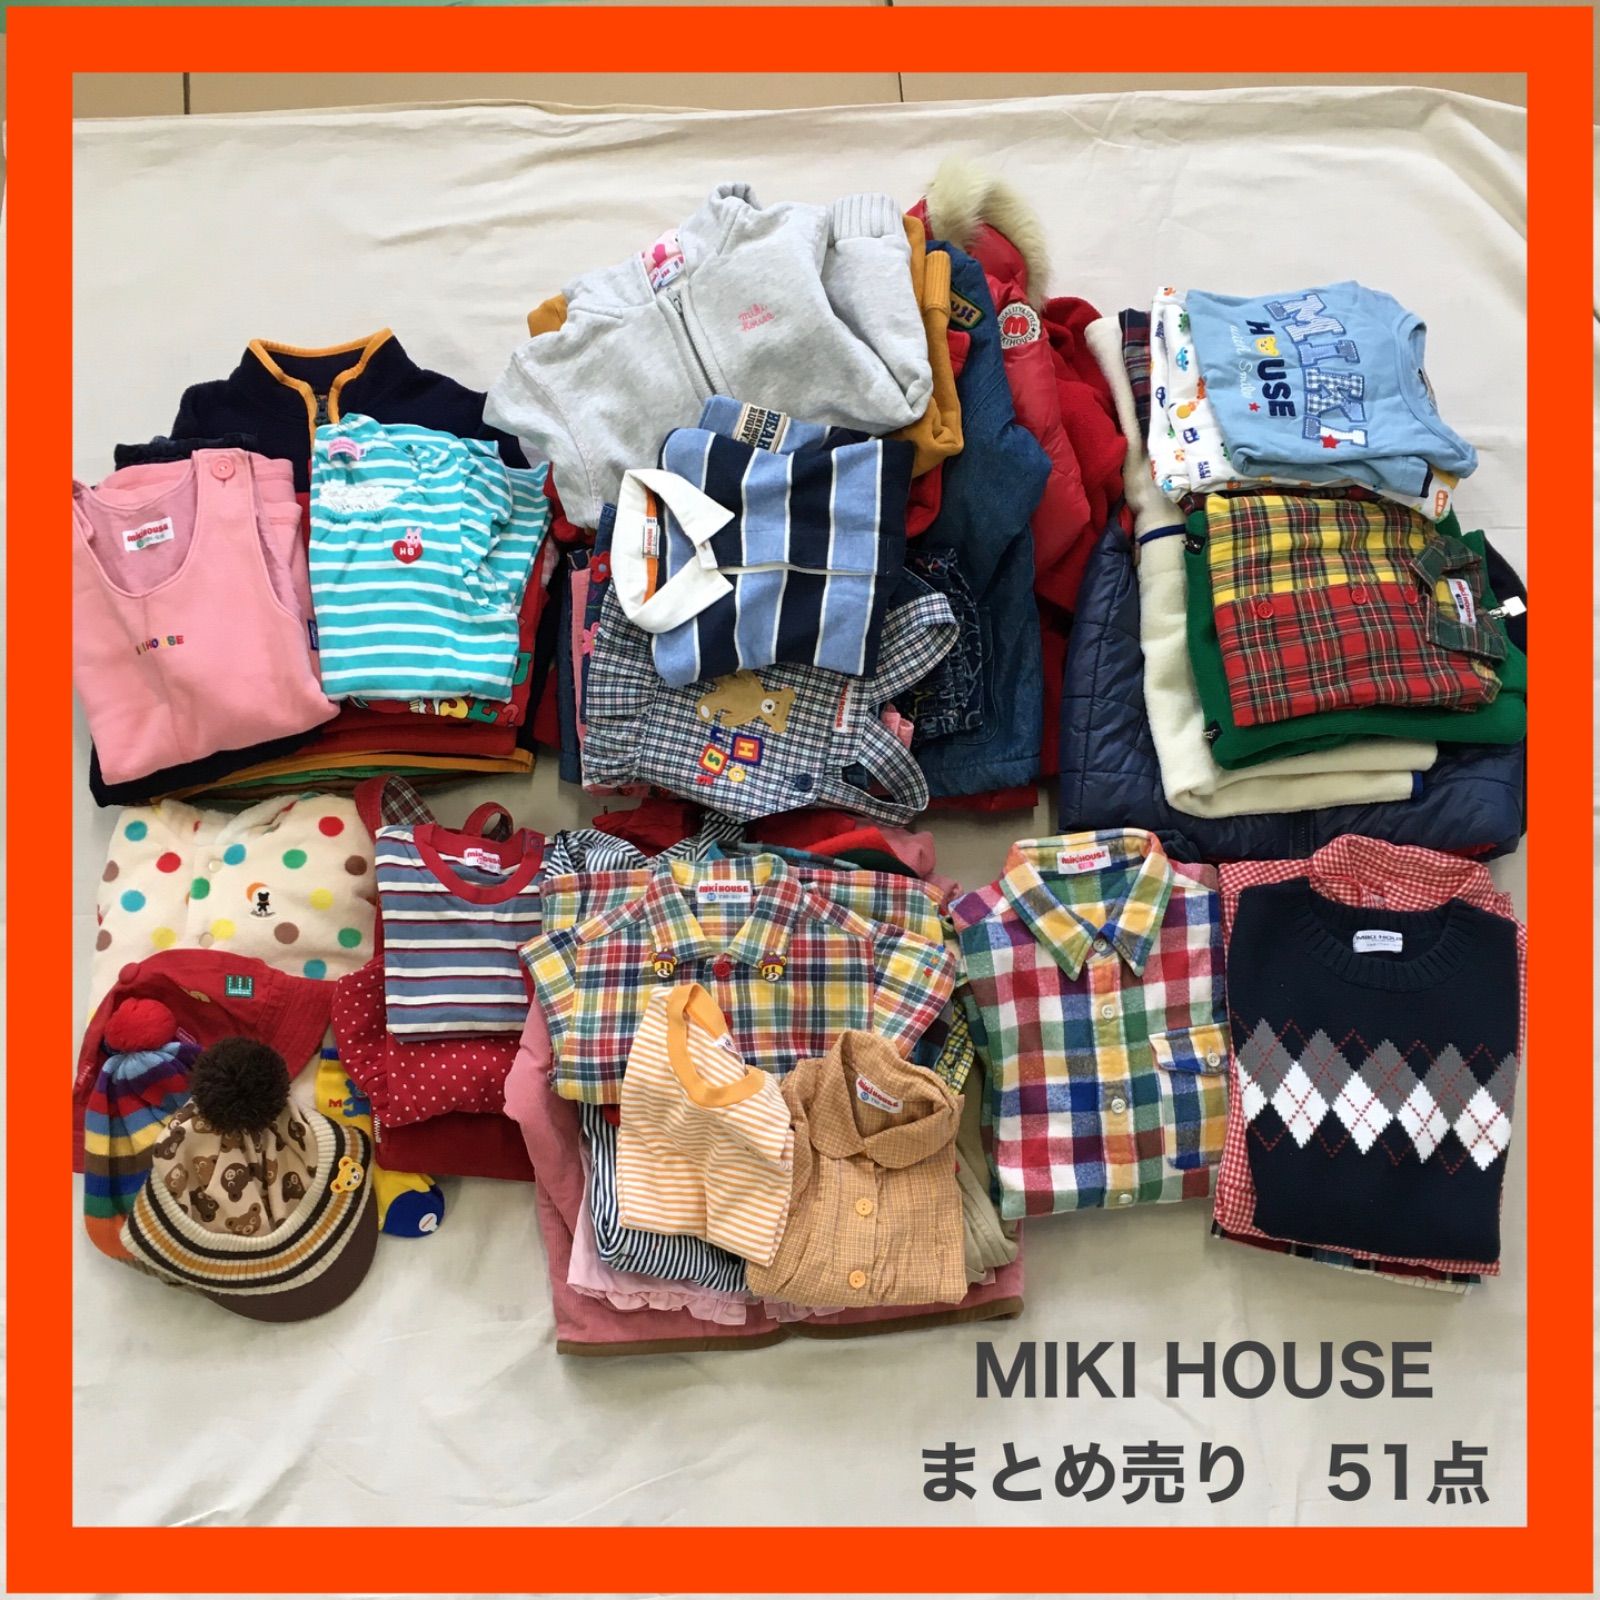 MIKI HOUSE まとめ売り - その他